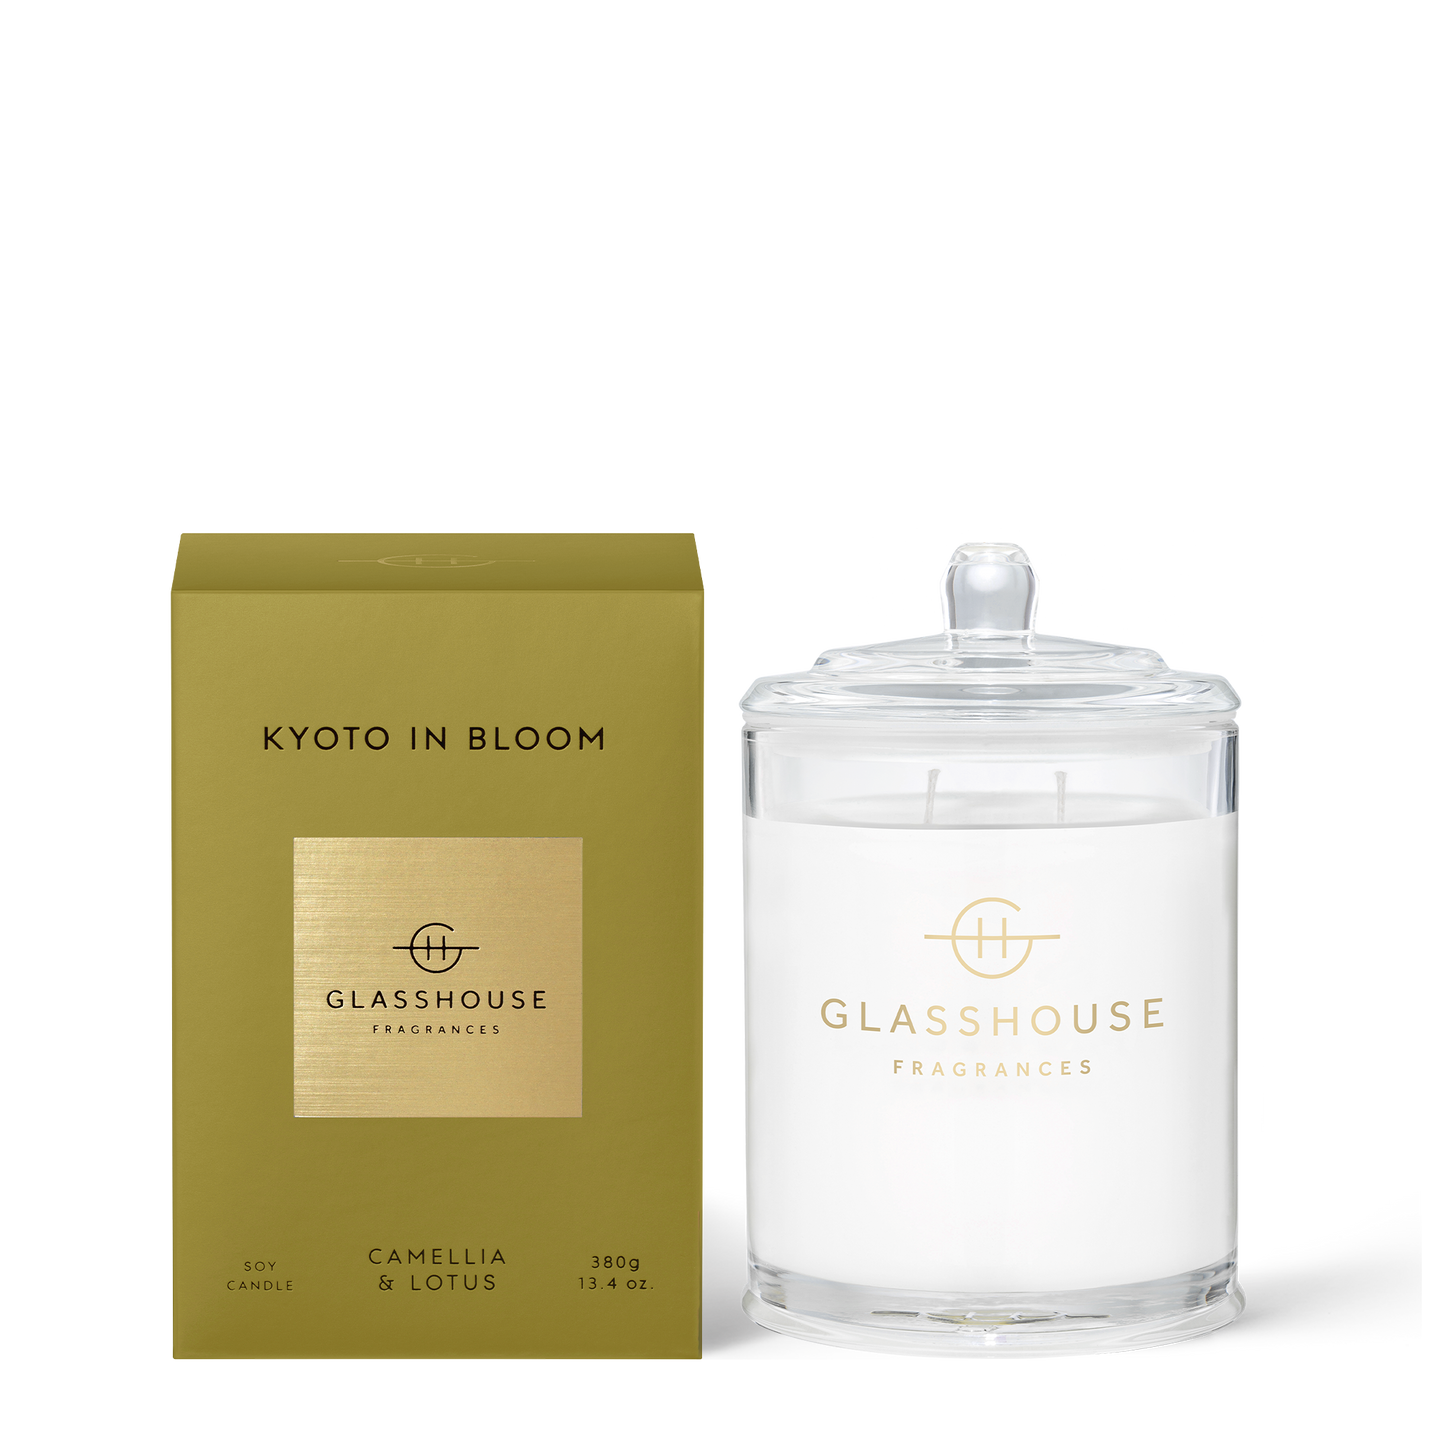 Kyoto In Bloom 380g Soy Candle - Glasshouse Fragrances